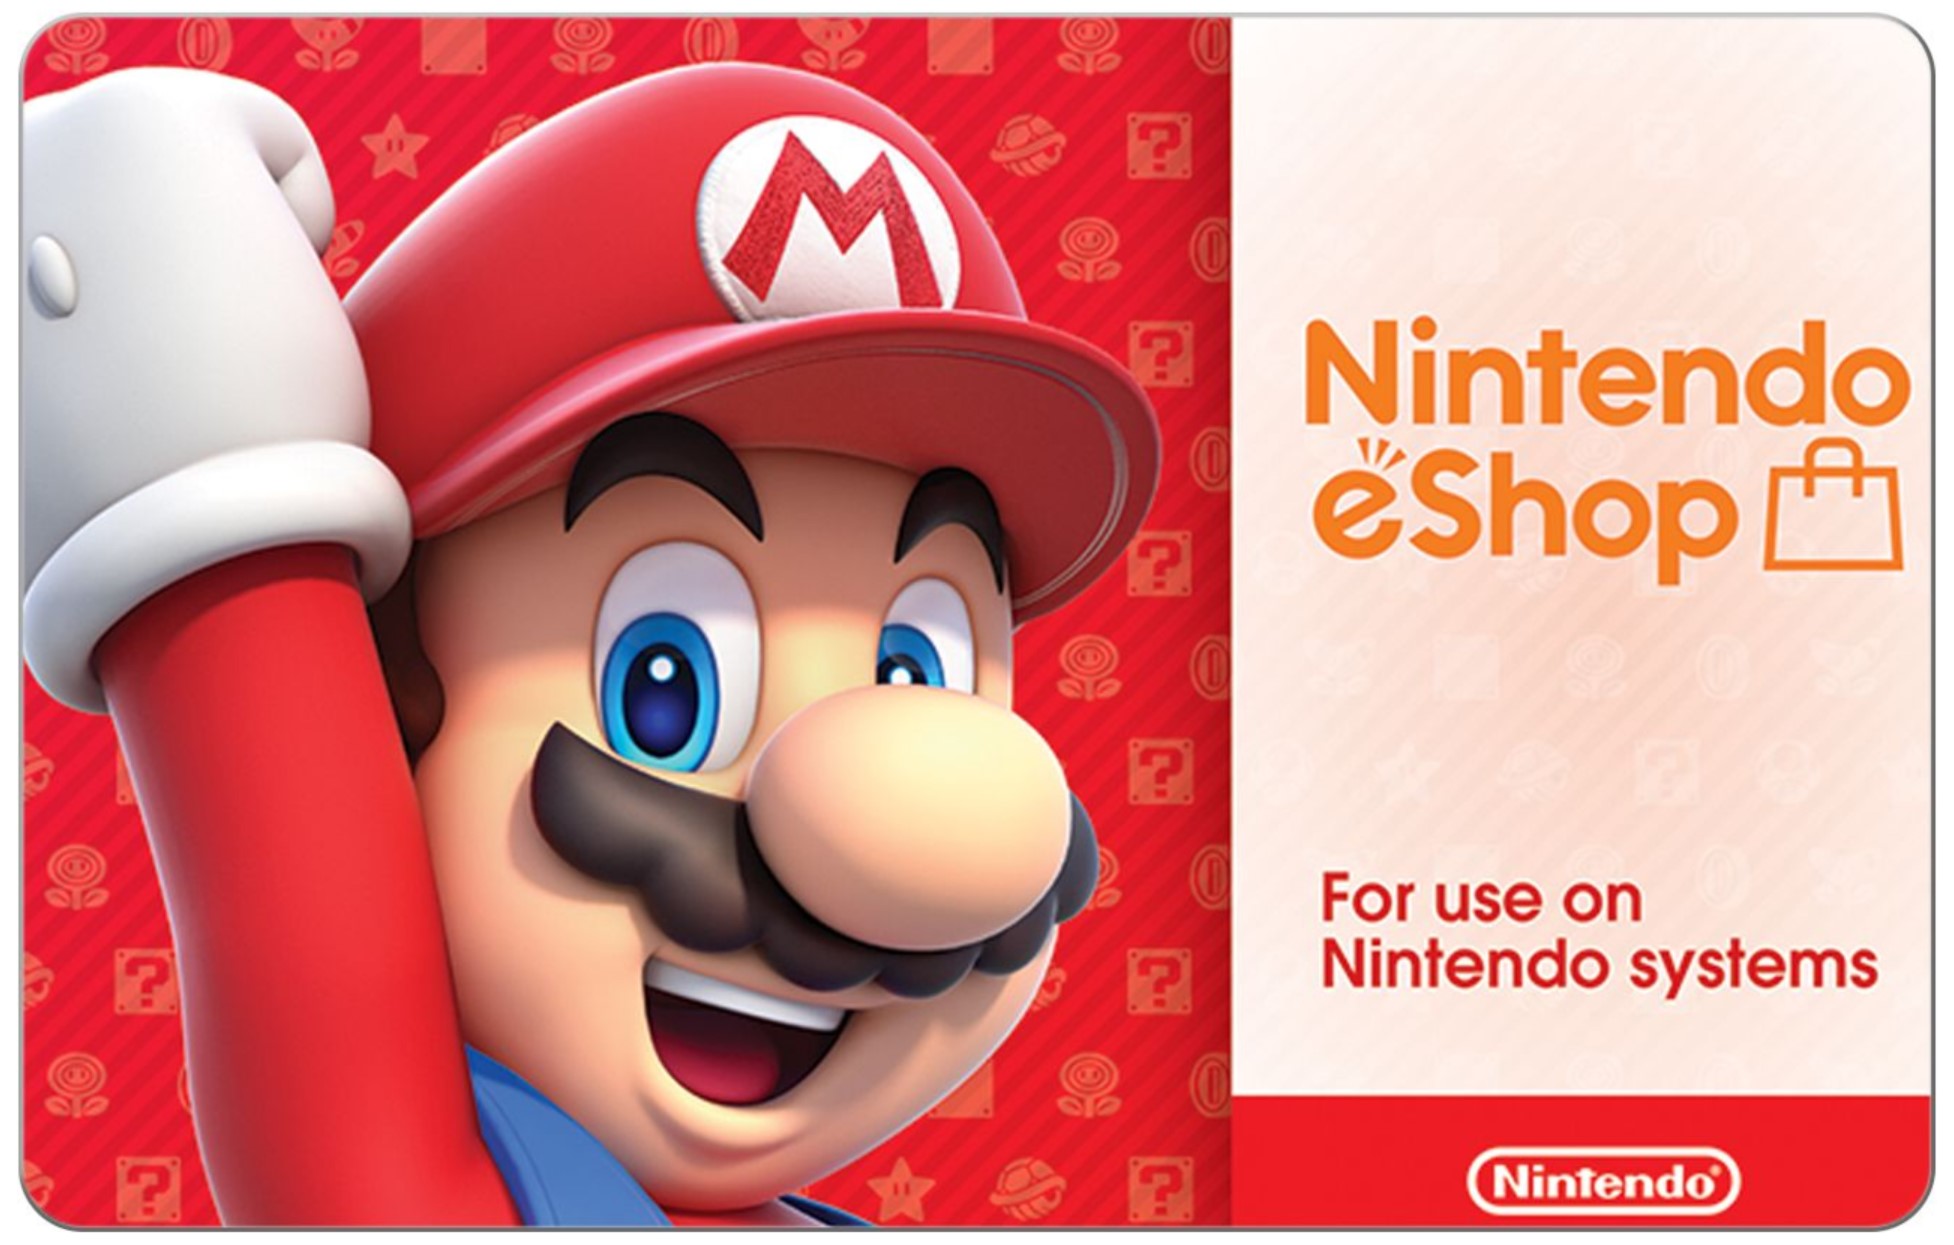 Nintendo eShop $50 Gift Card (Email Delivery) $45